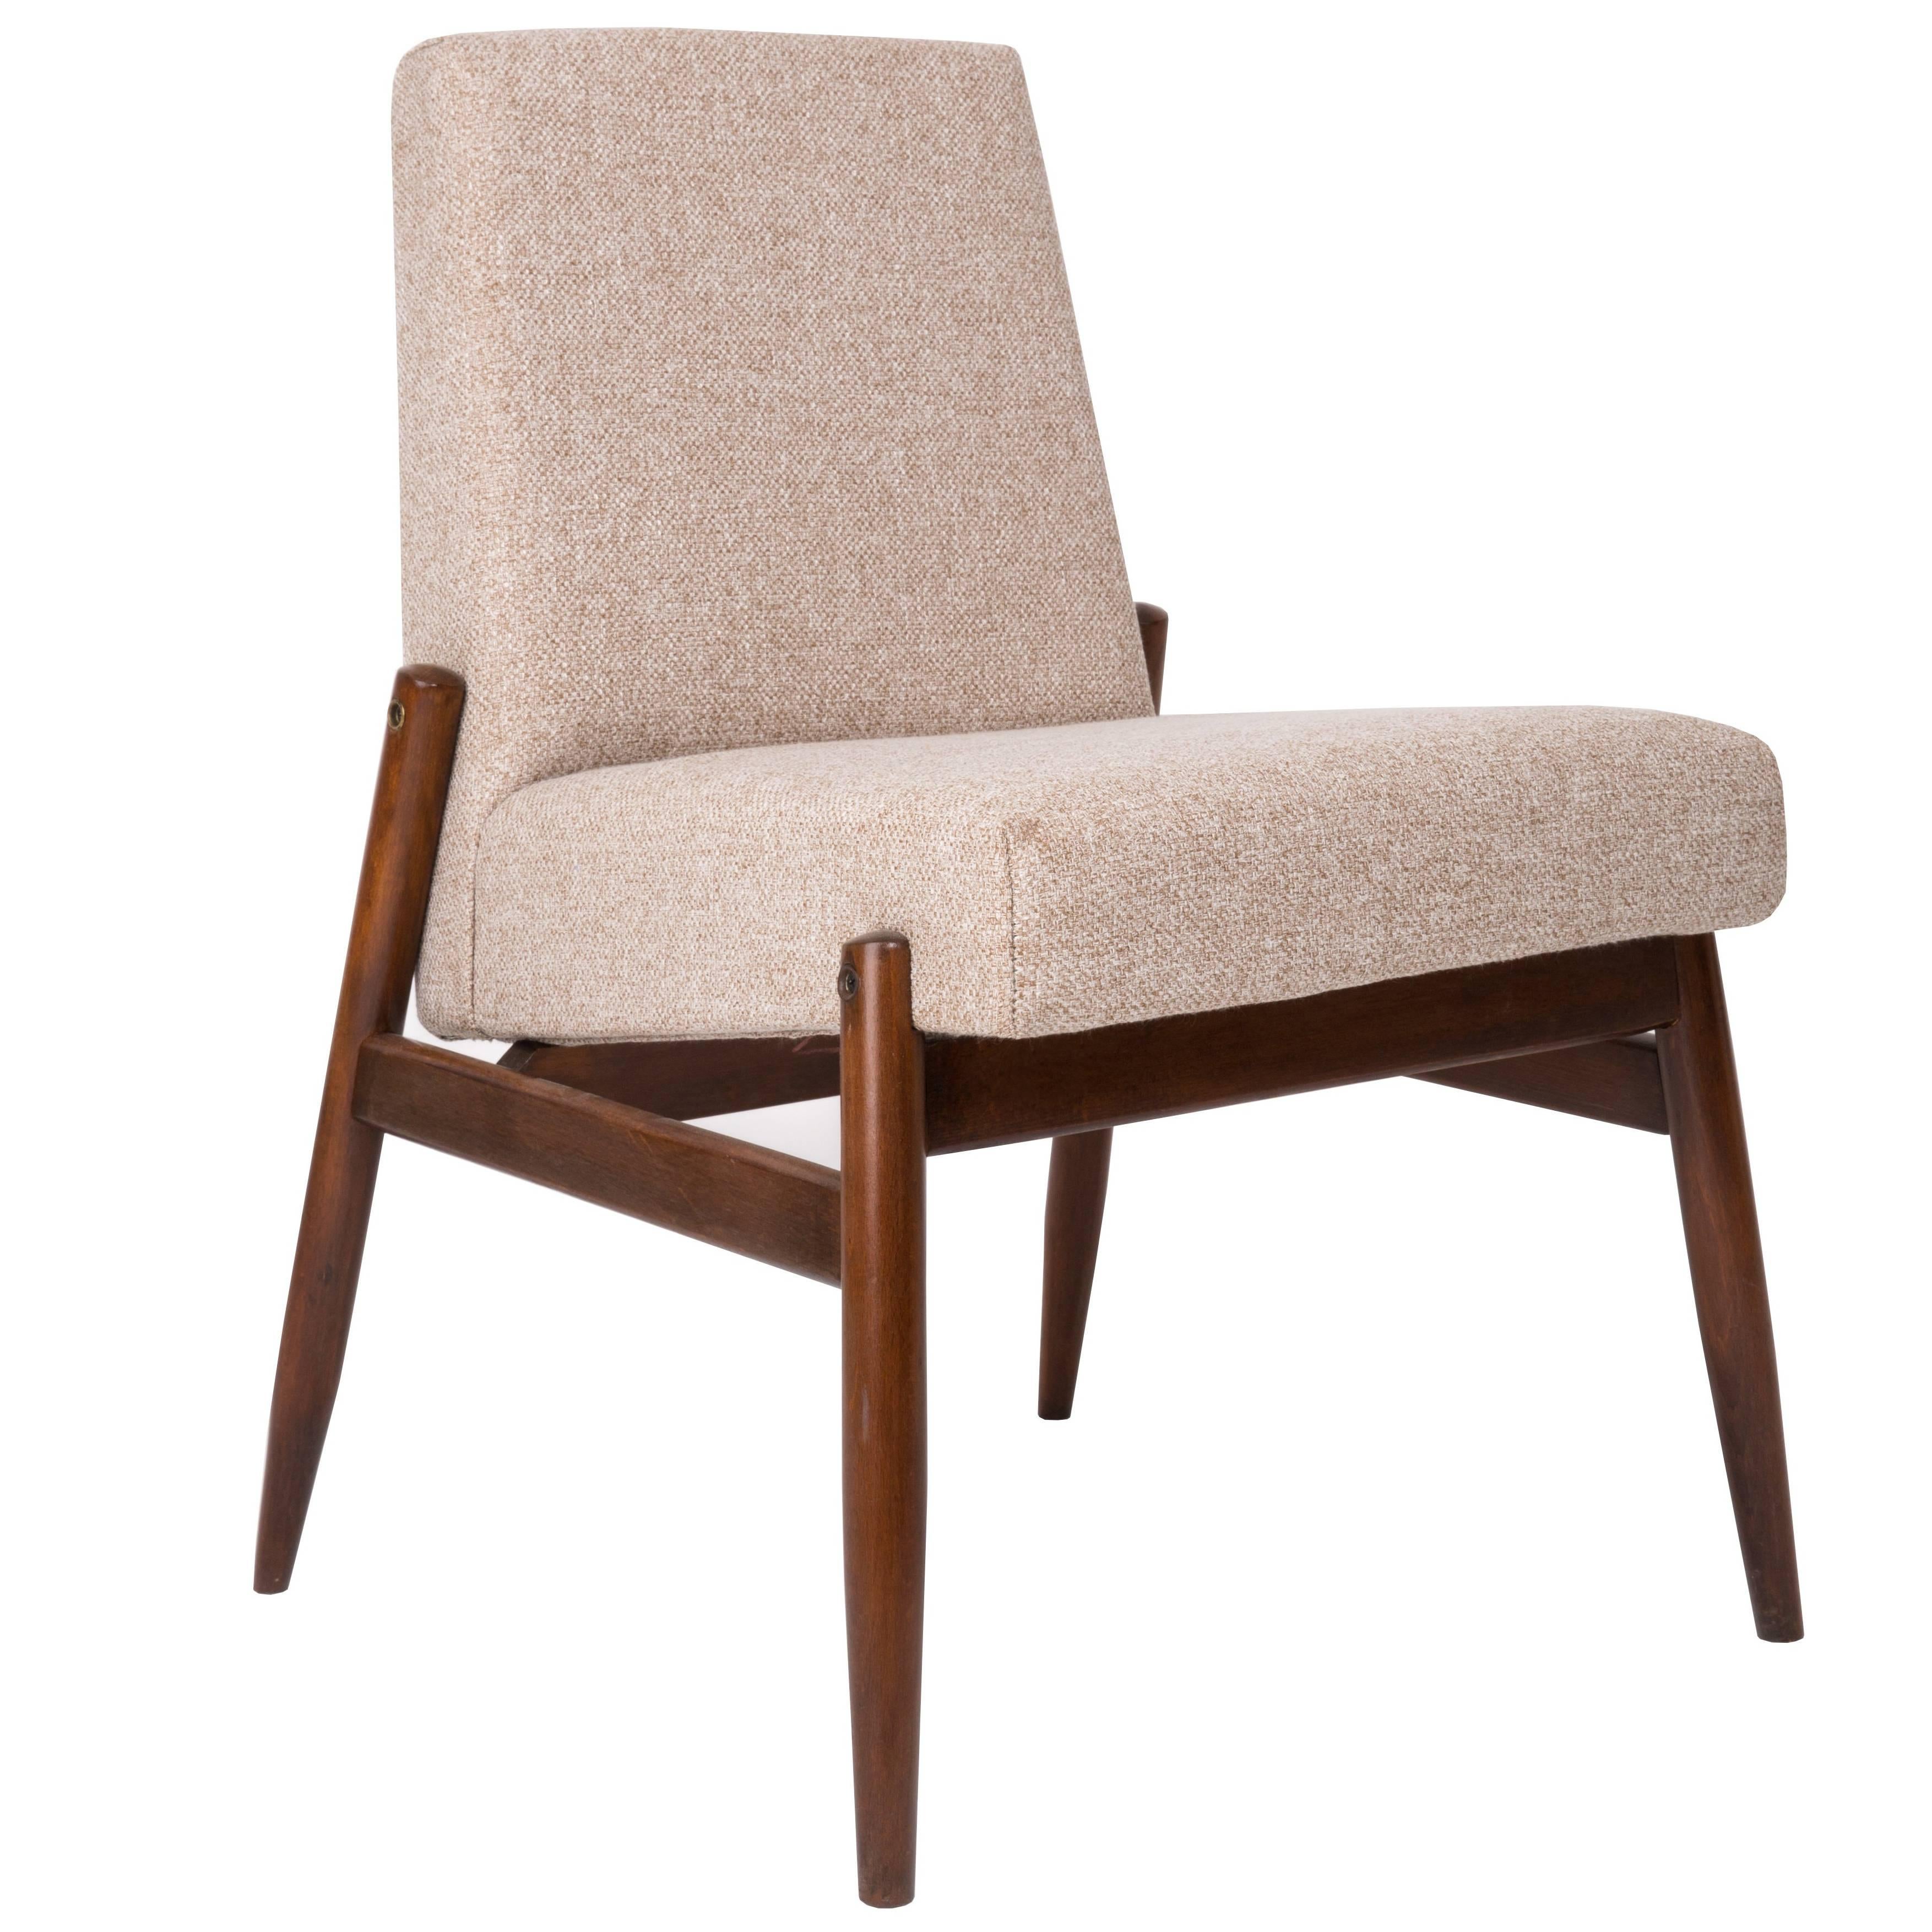 20th Century Beige Armchair, 300-227 Type, 1960s, Poland For Sale